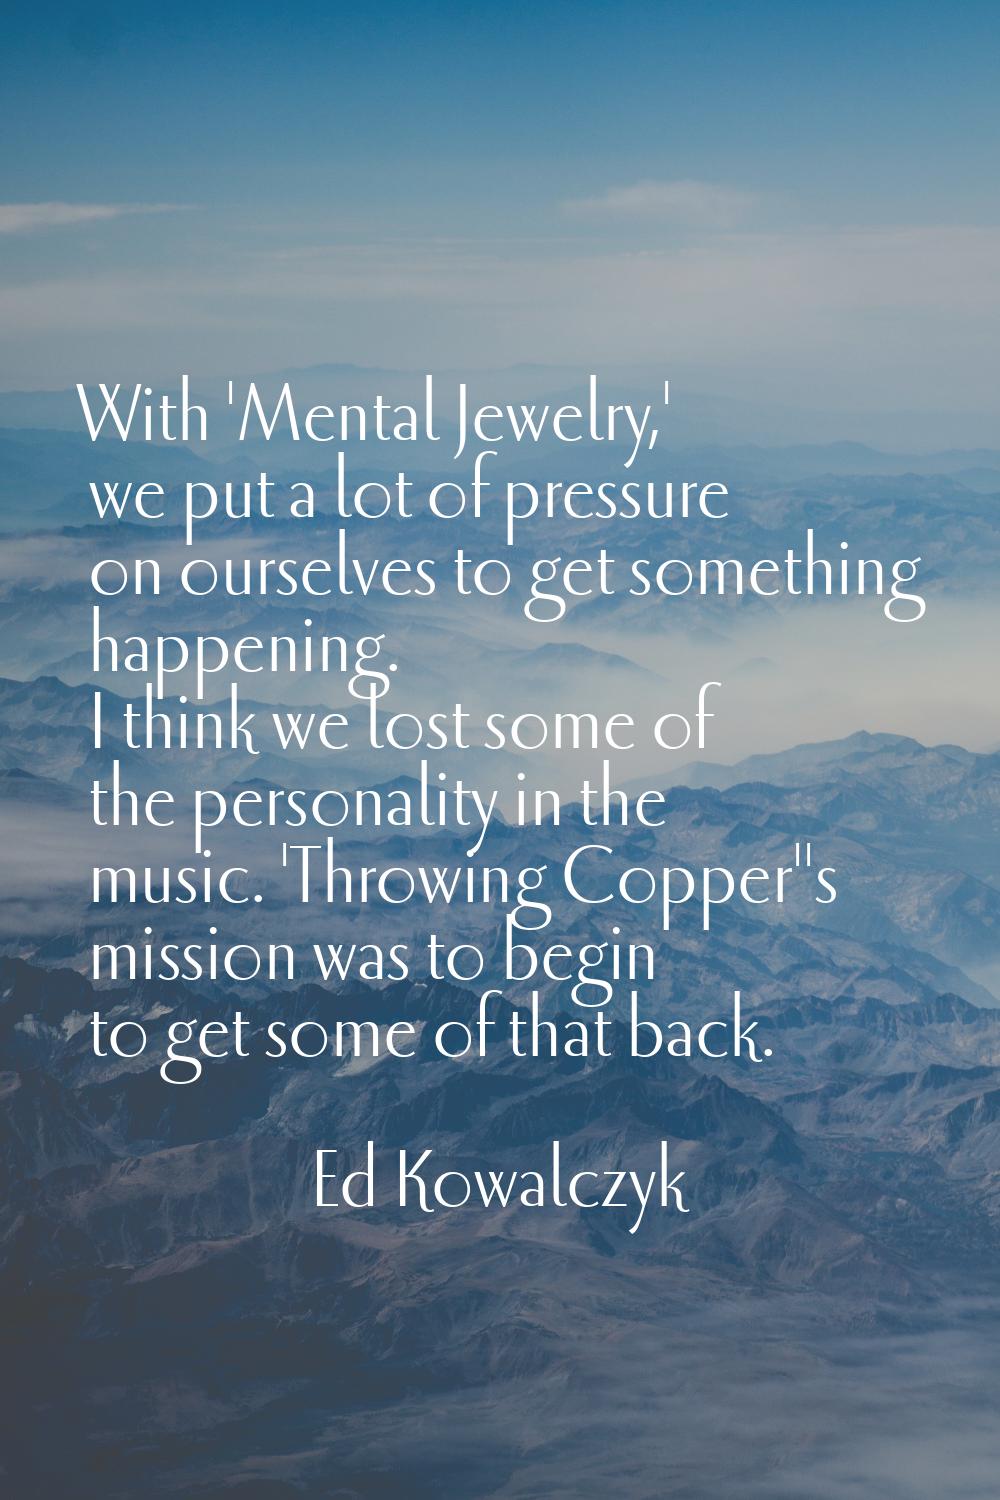 With 'Mental Jewelry,' we put a lot of pressure on ourselves to get something happening. I think we